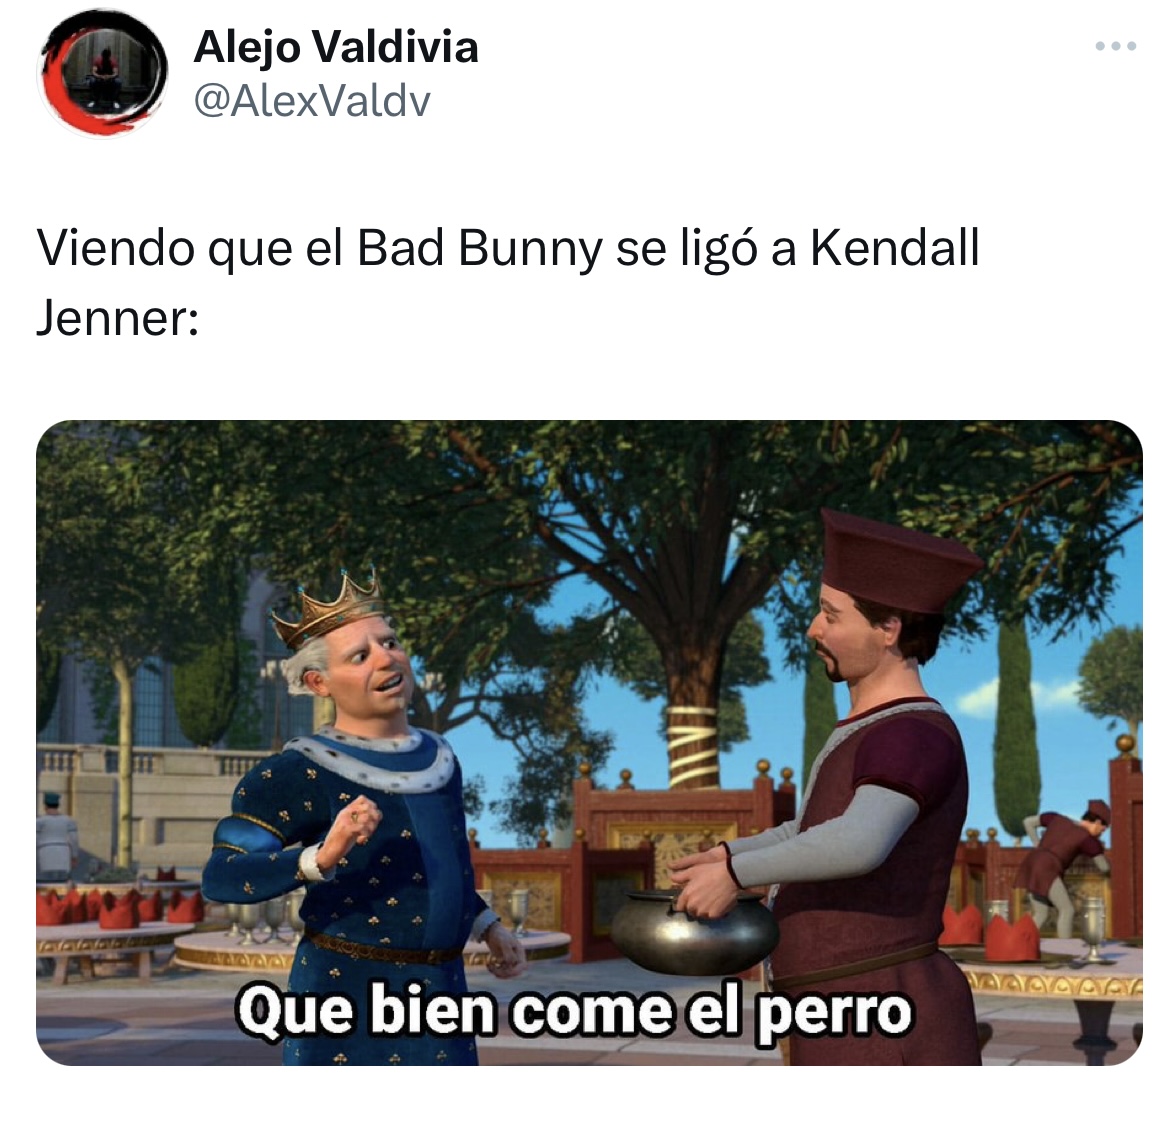 The best reactions to the kiss of Bad Bunny and Kendall Jenner